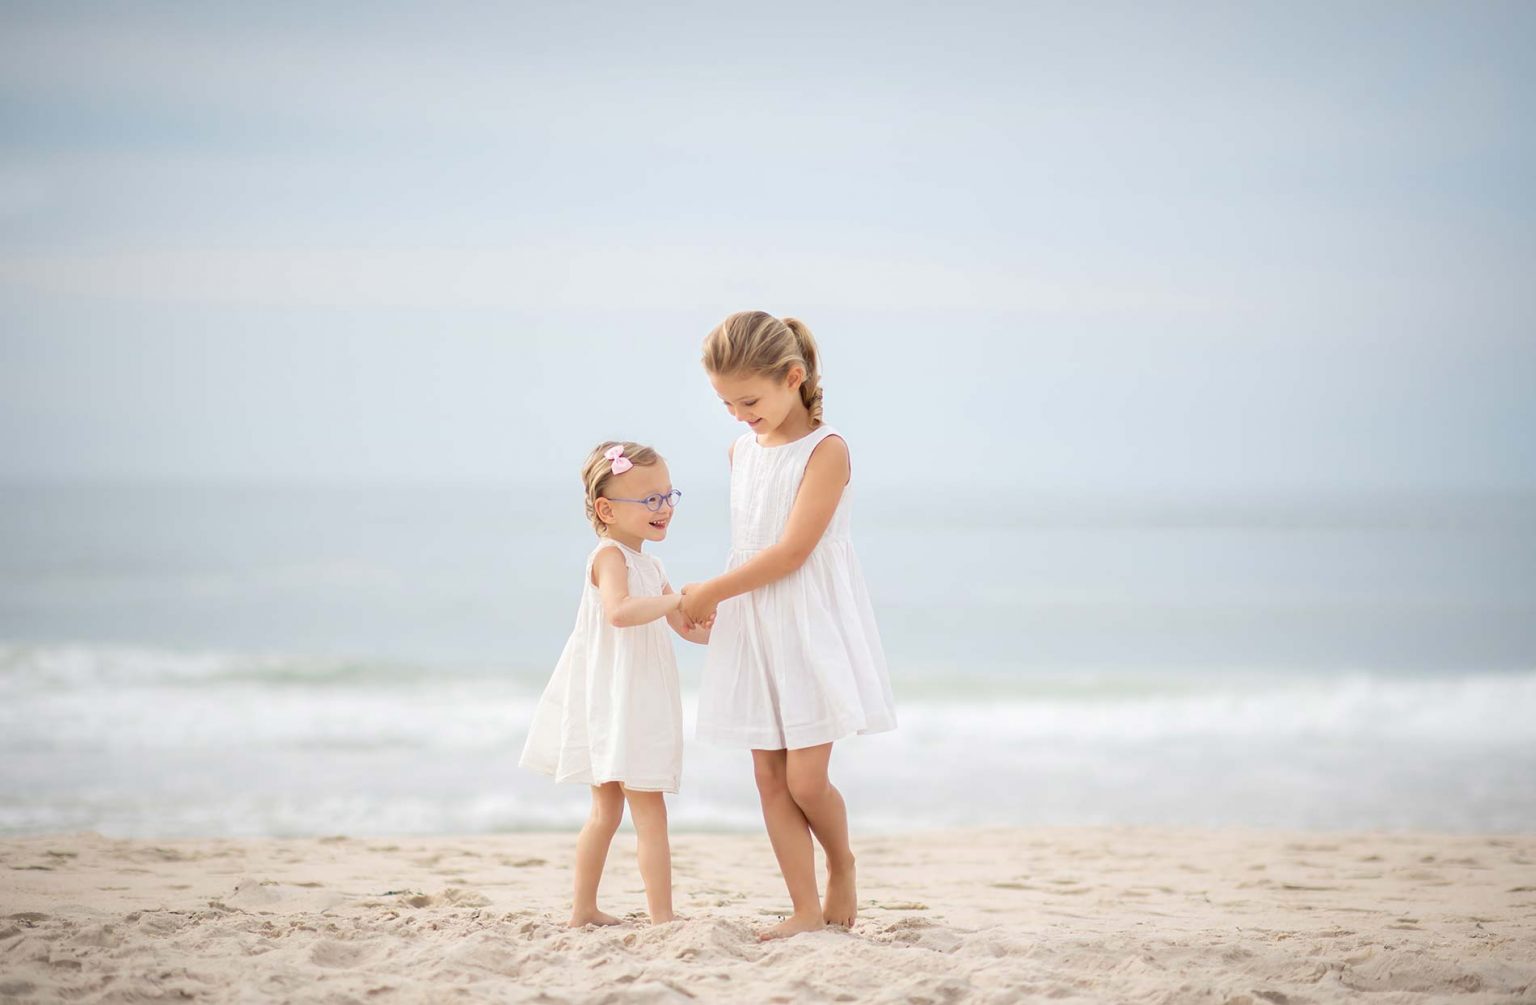 Two sisters in white dresses dancing on a beach in Southampton